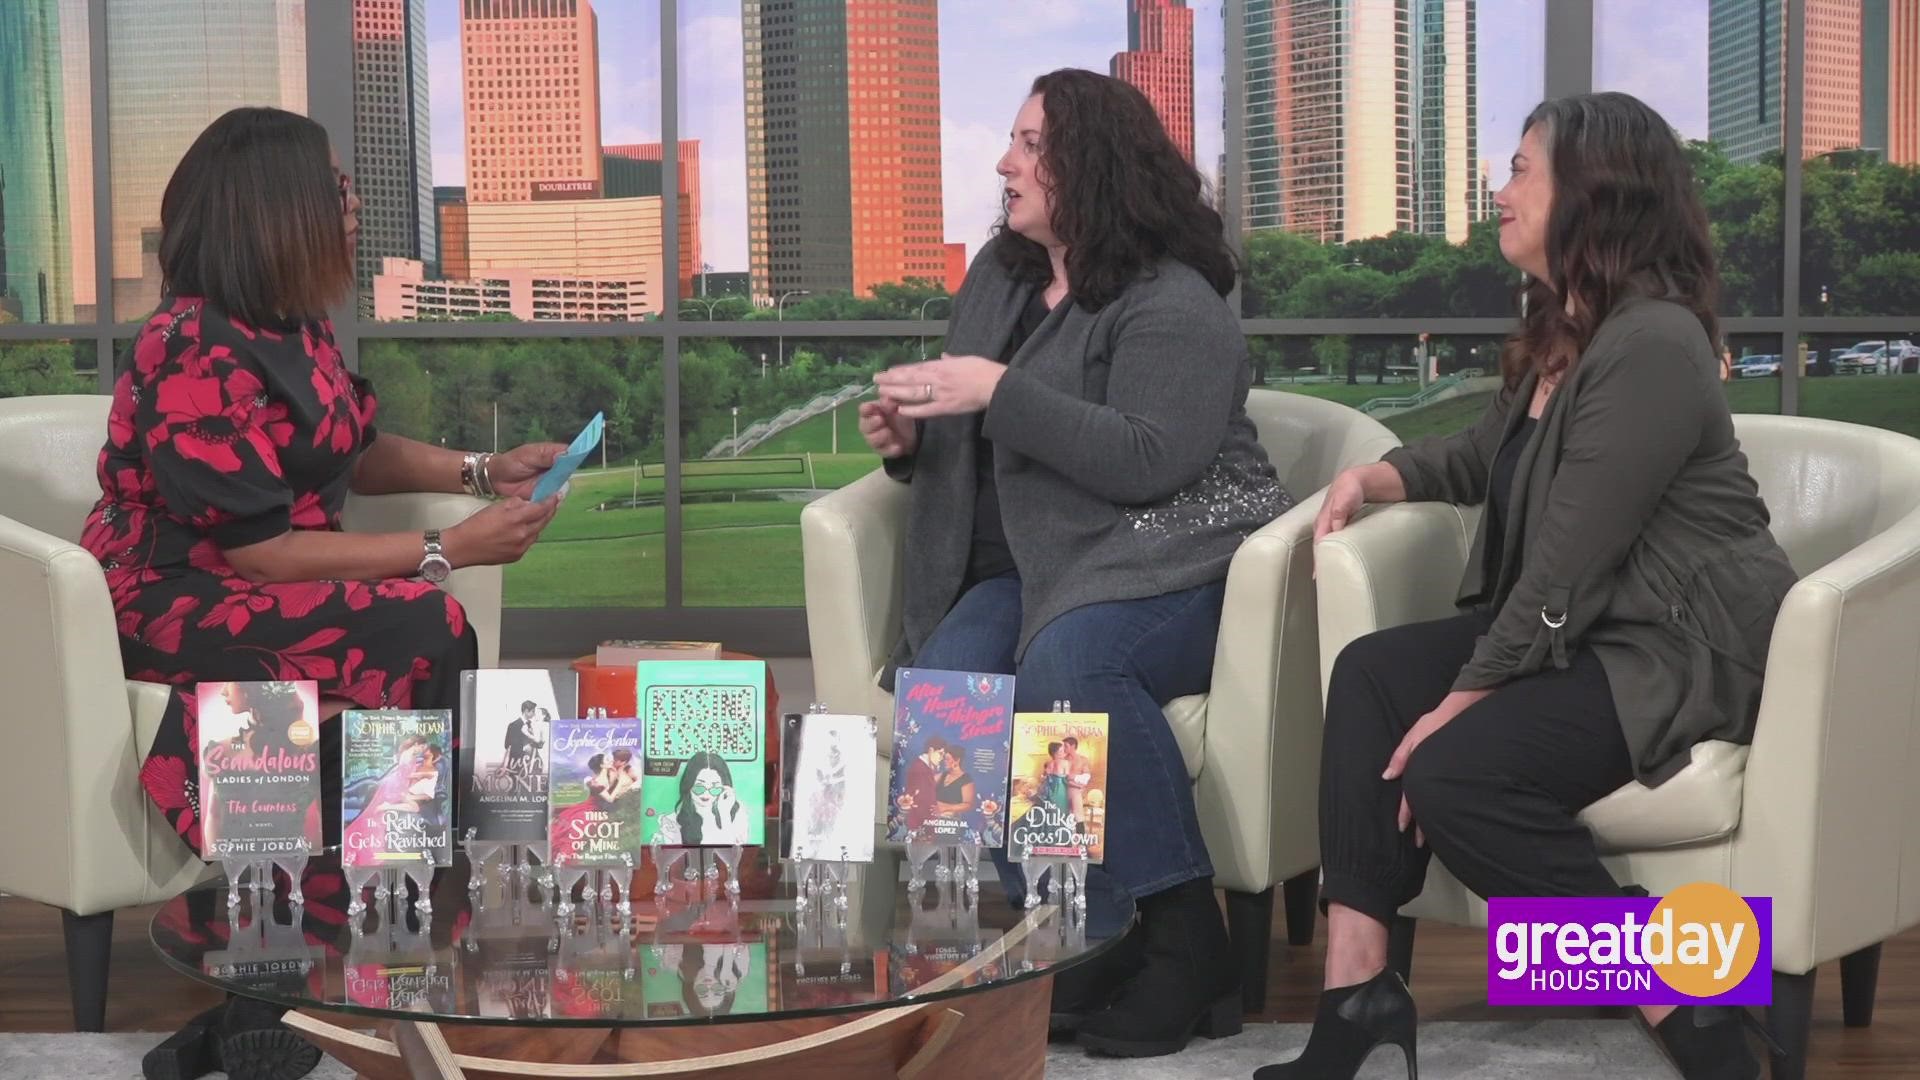 Local authors Sophie Jordan and Angelina M. Lopez discuss the bestselling romance novel genre